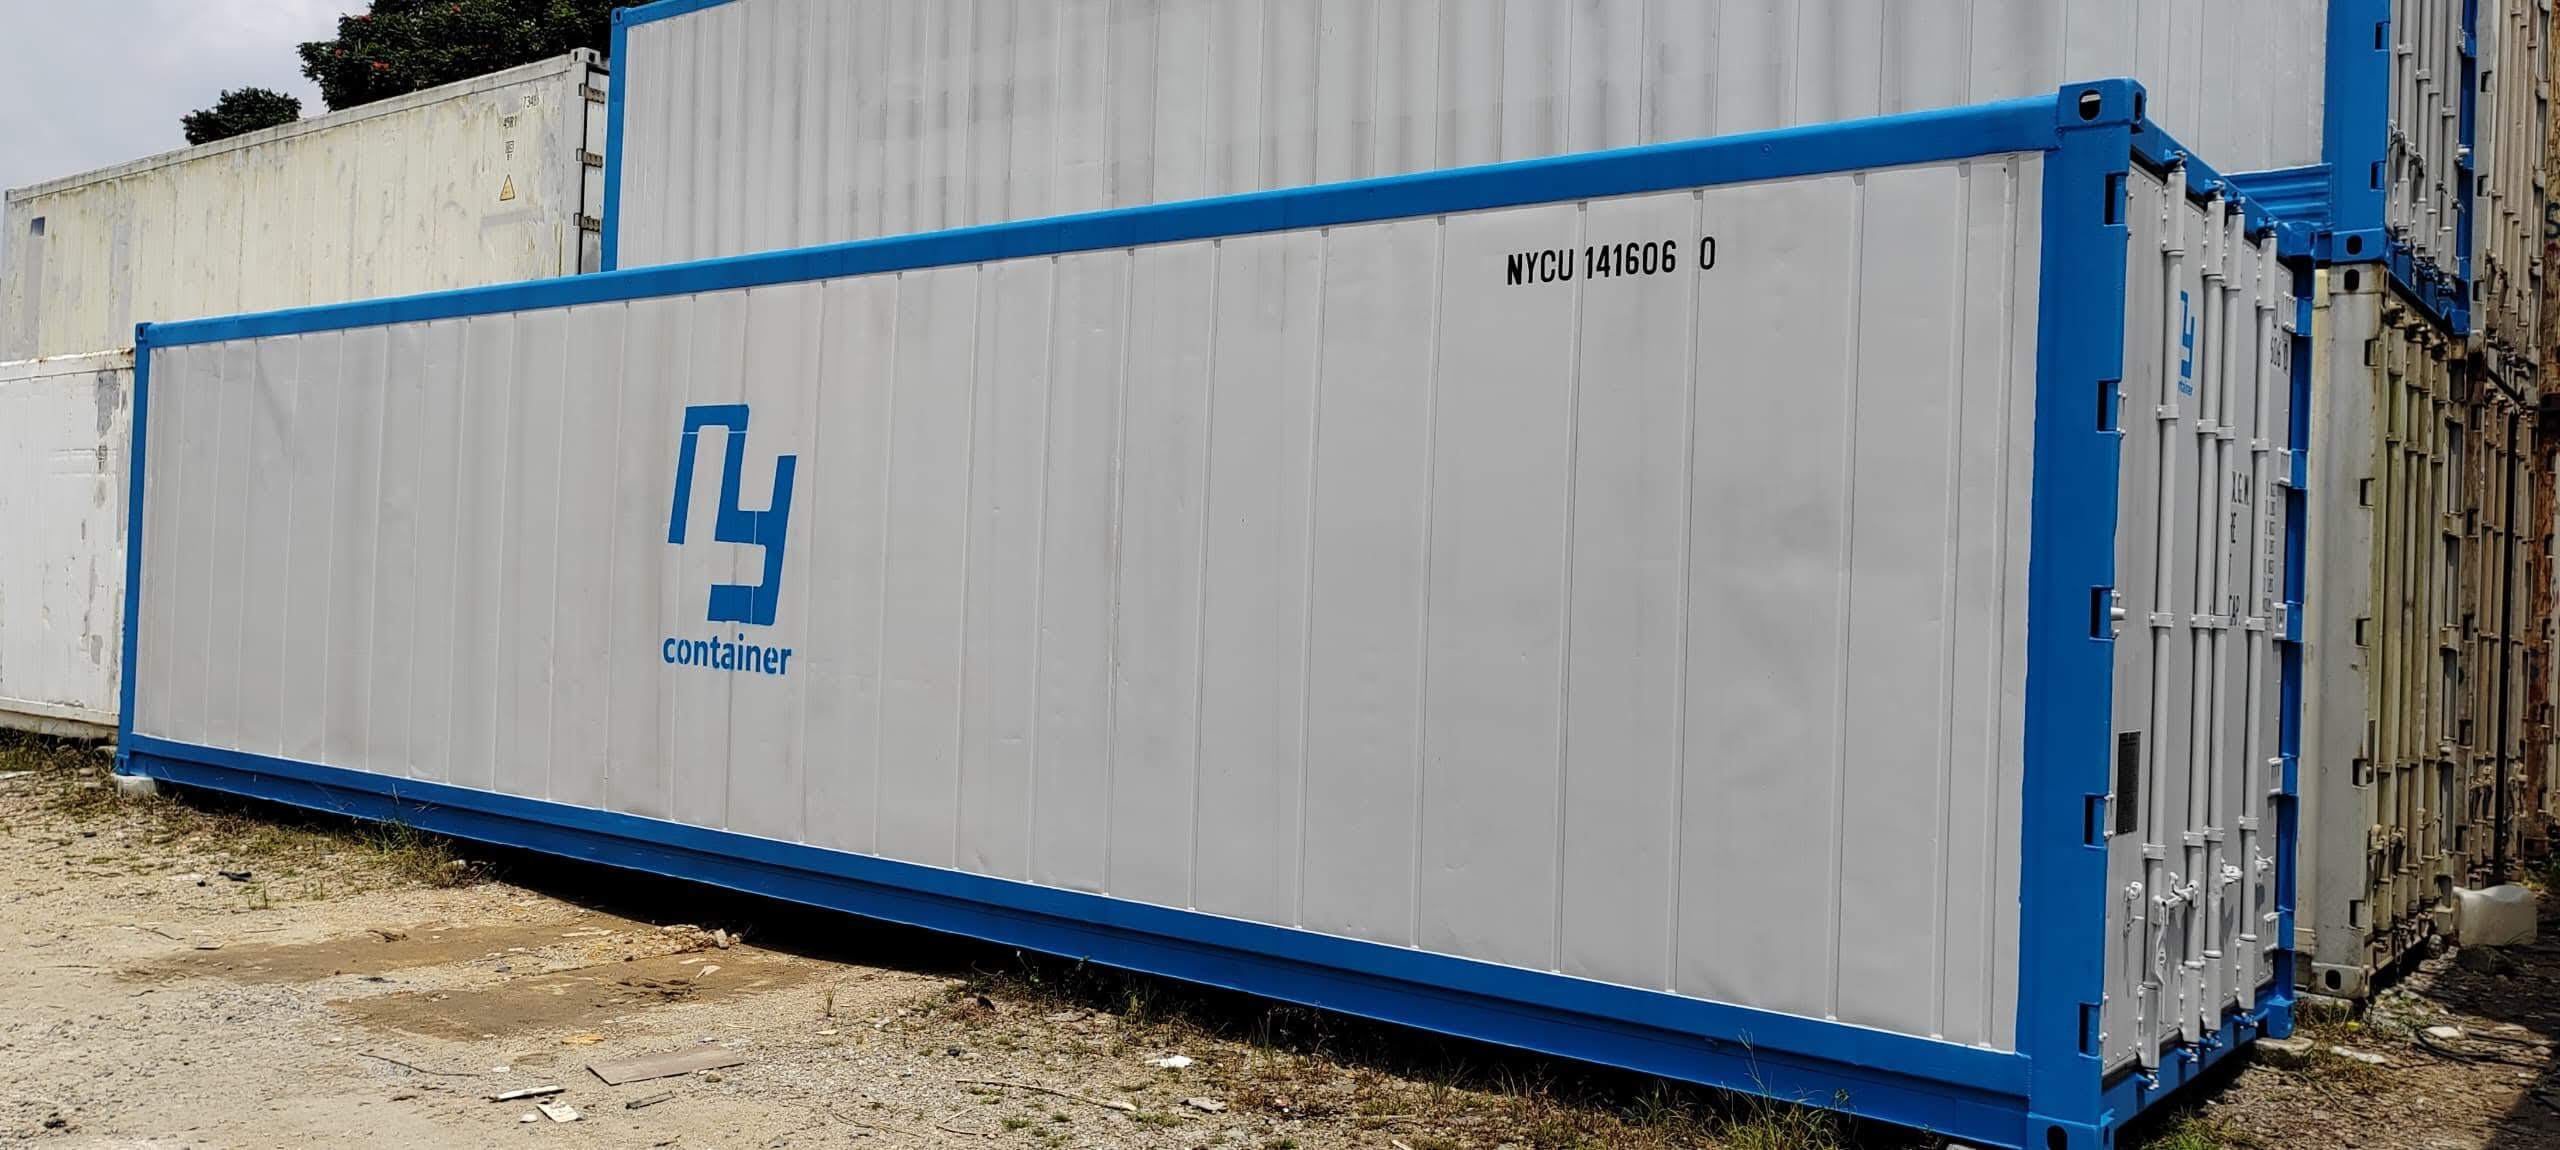 40 ft Reefer Containers side view with NY Container Logo